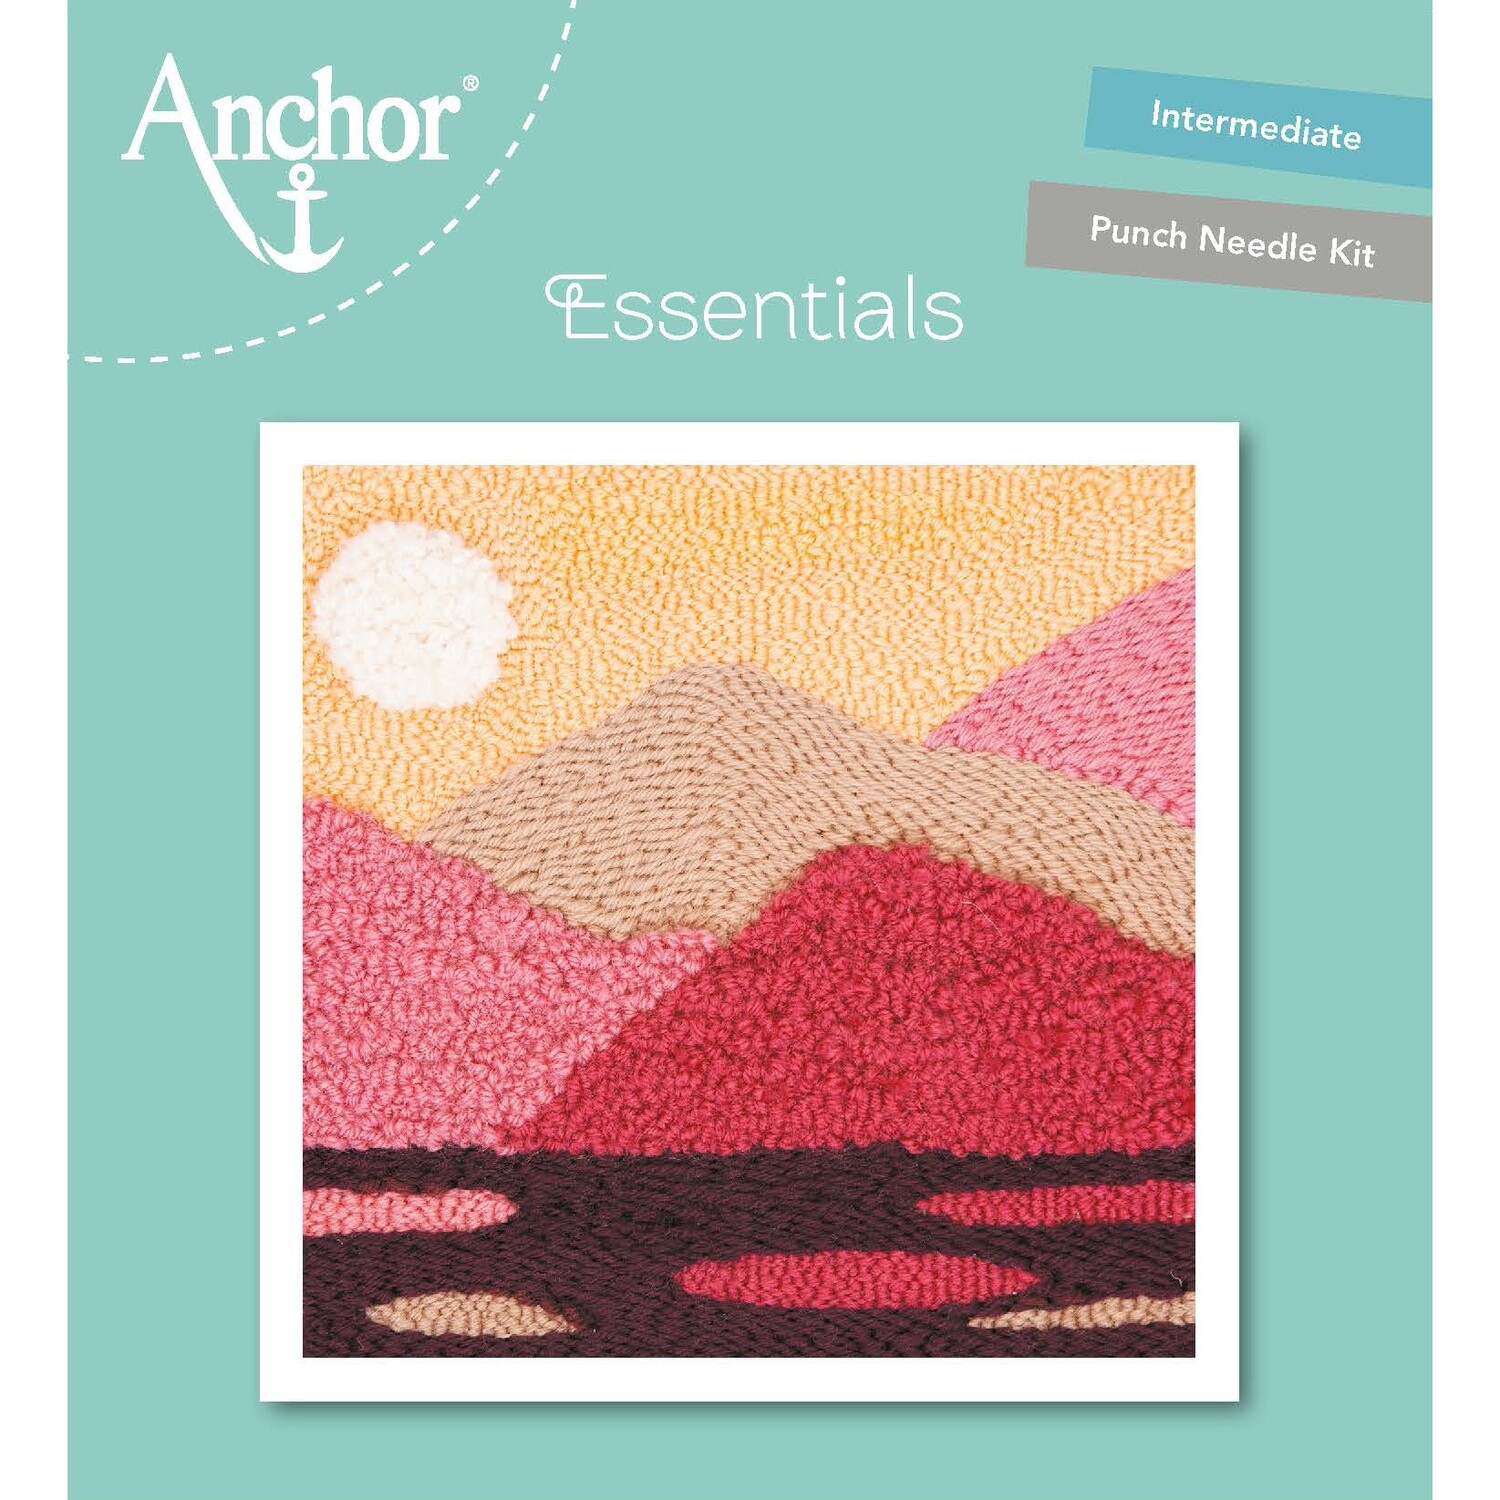 Anchor Essentials Punch Needle Kit - Tranquil mountain (15 x 15 cm)